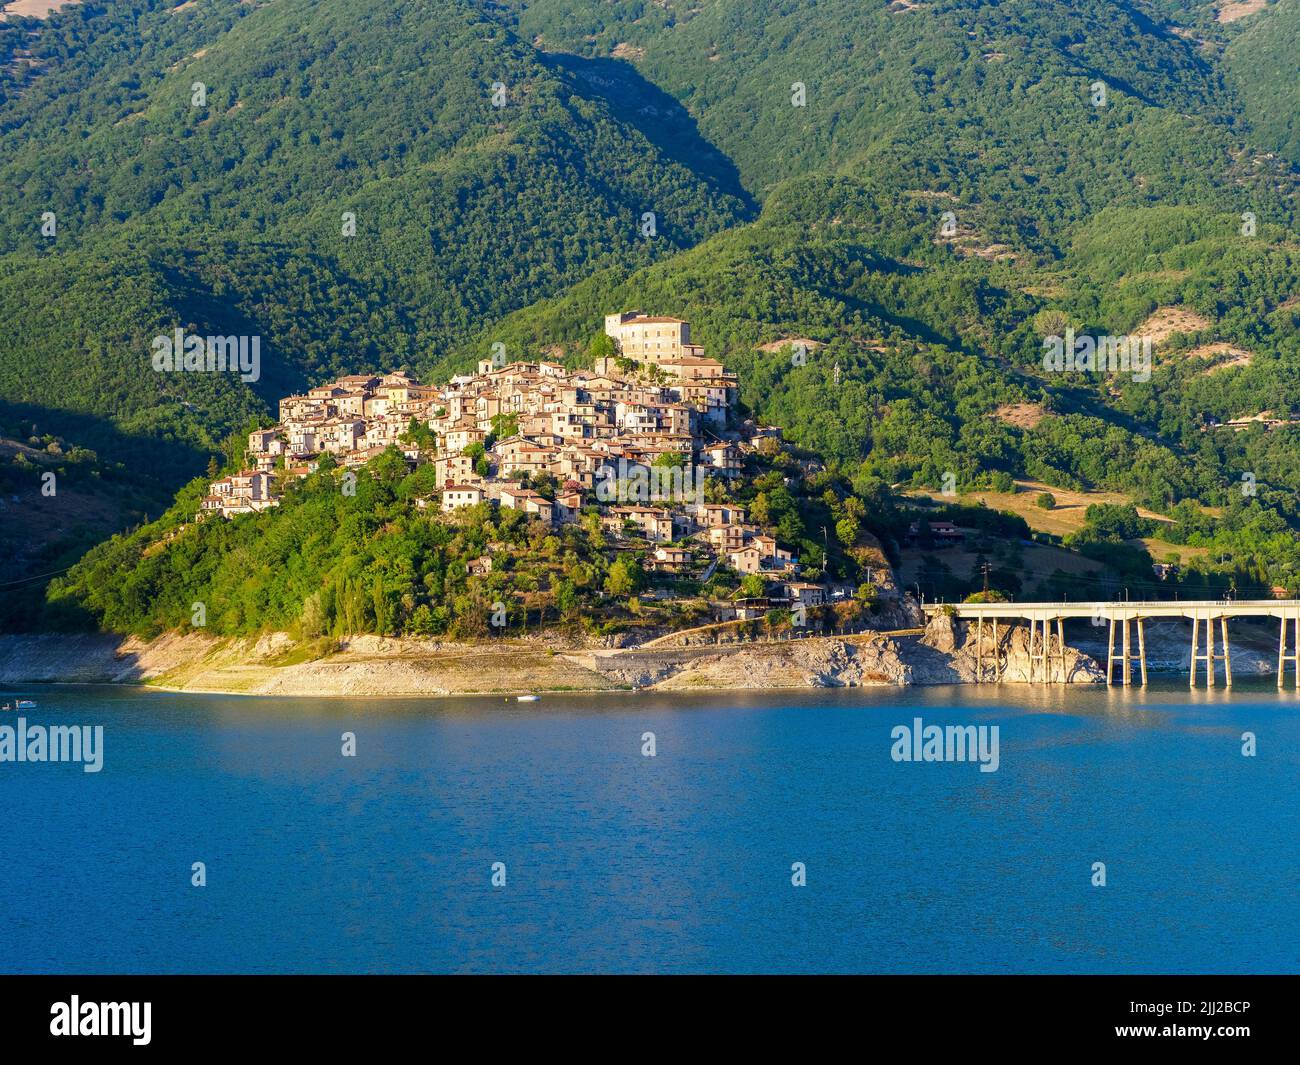 The Little town of Castel di Tora and the Turano lake - Rieti, Italy Stock Photo